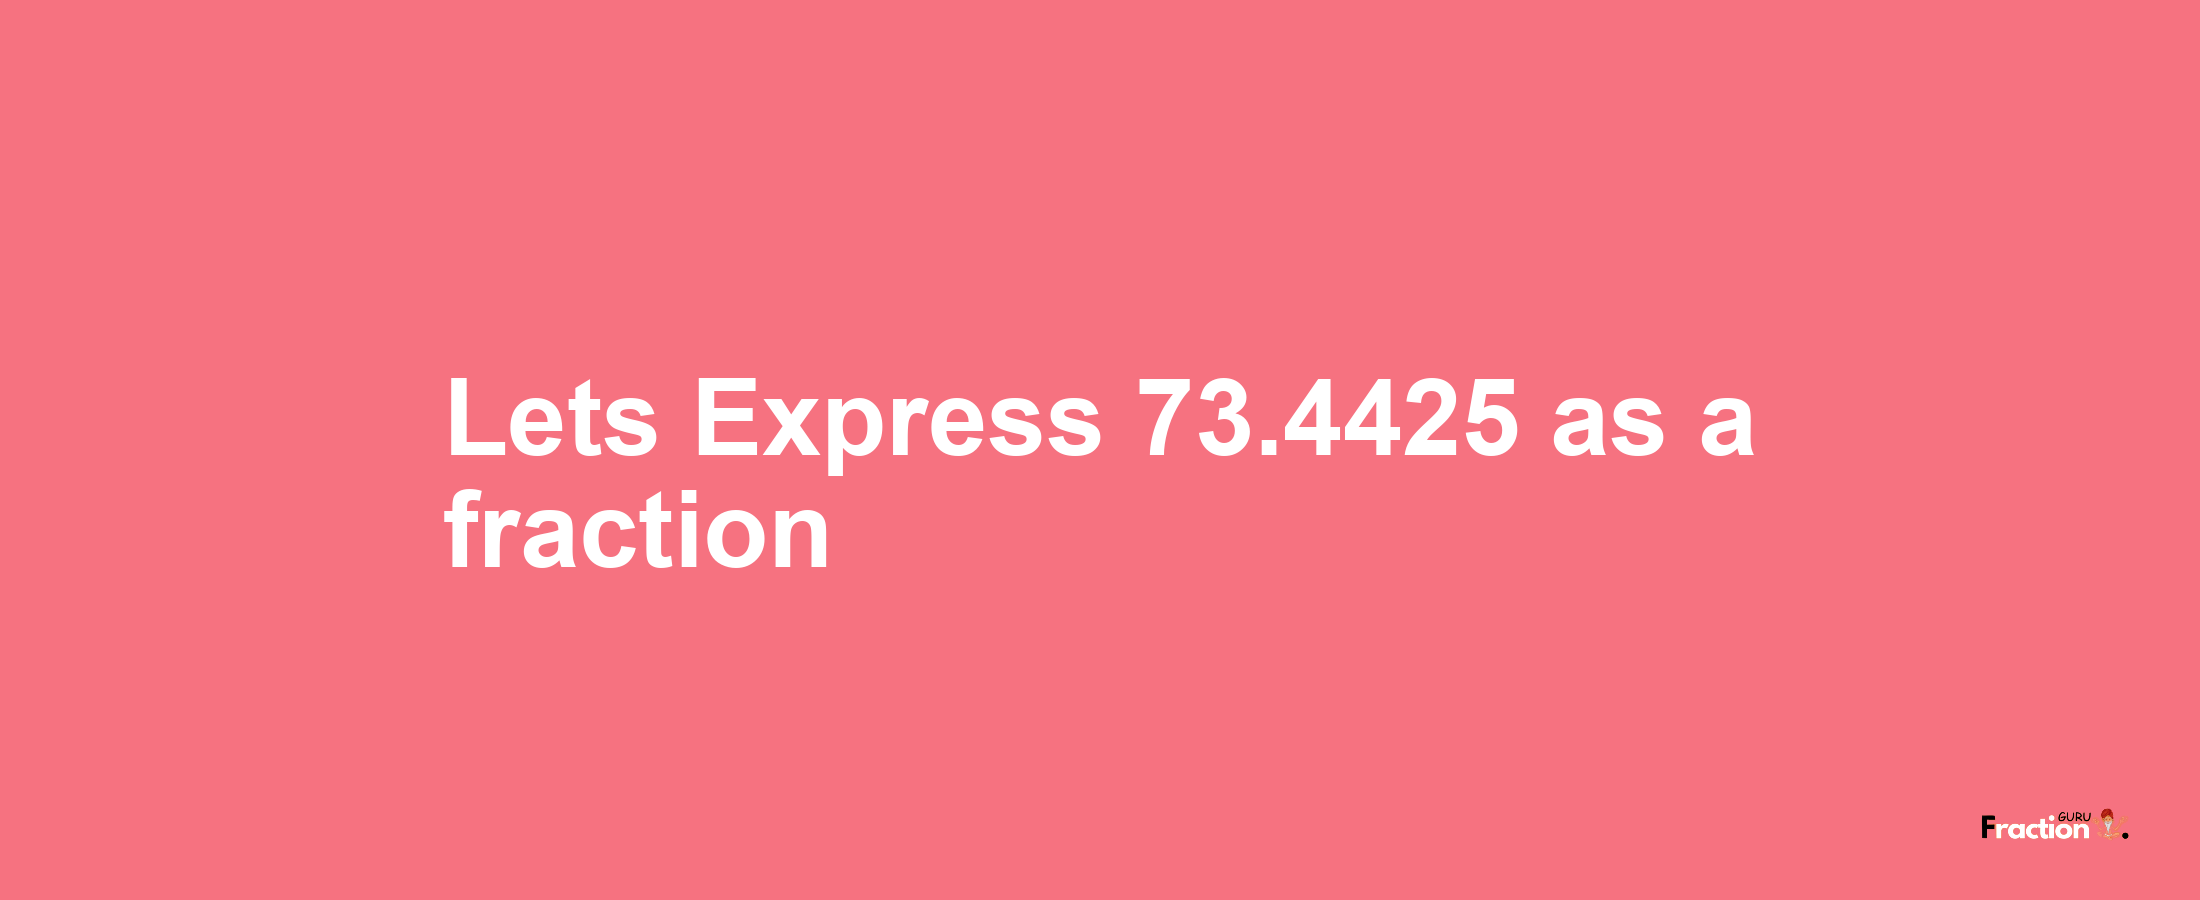 Lets Express 73.4425 as afraction